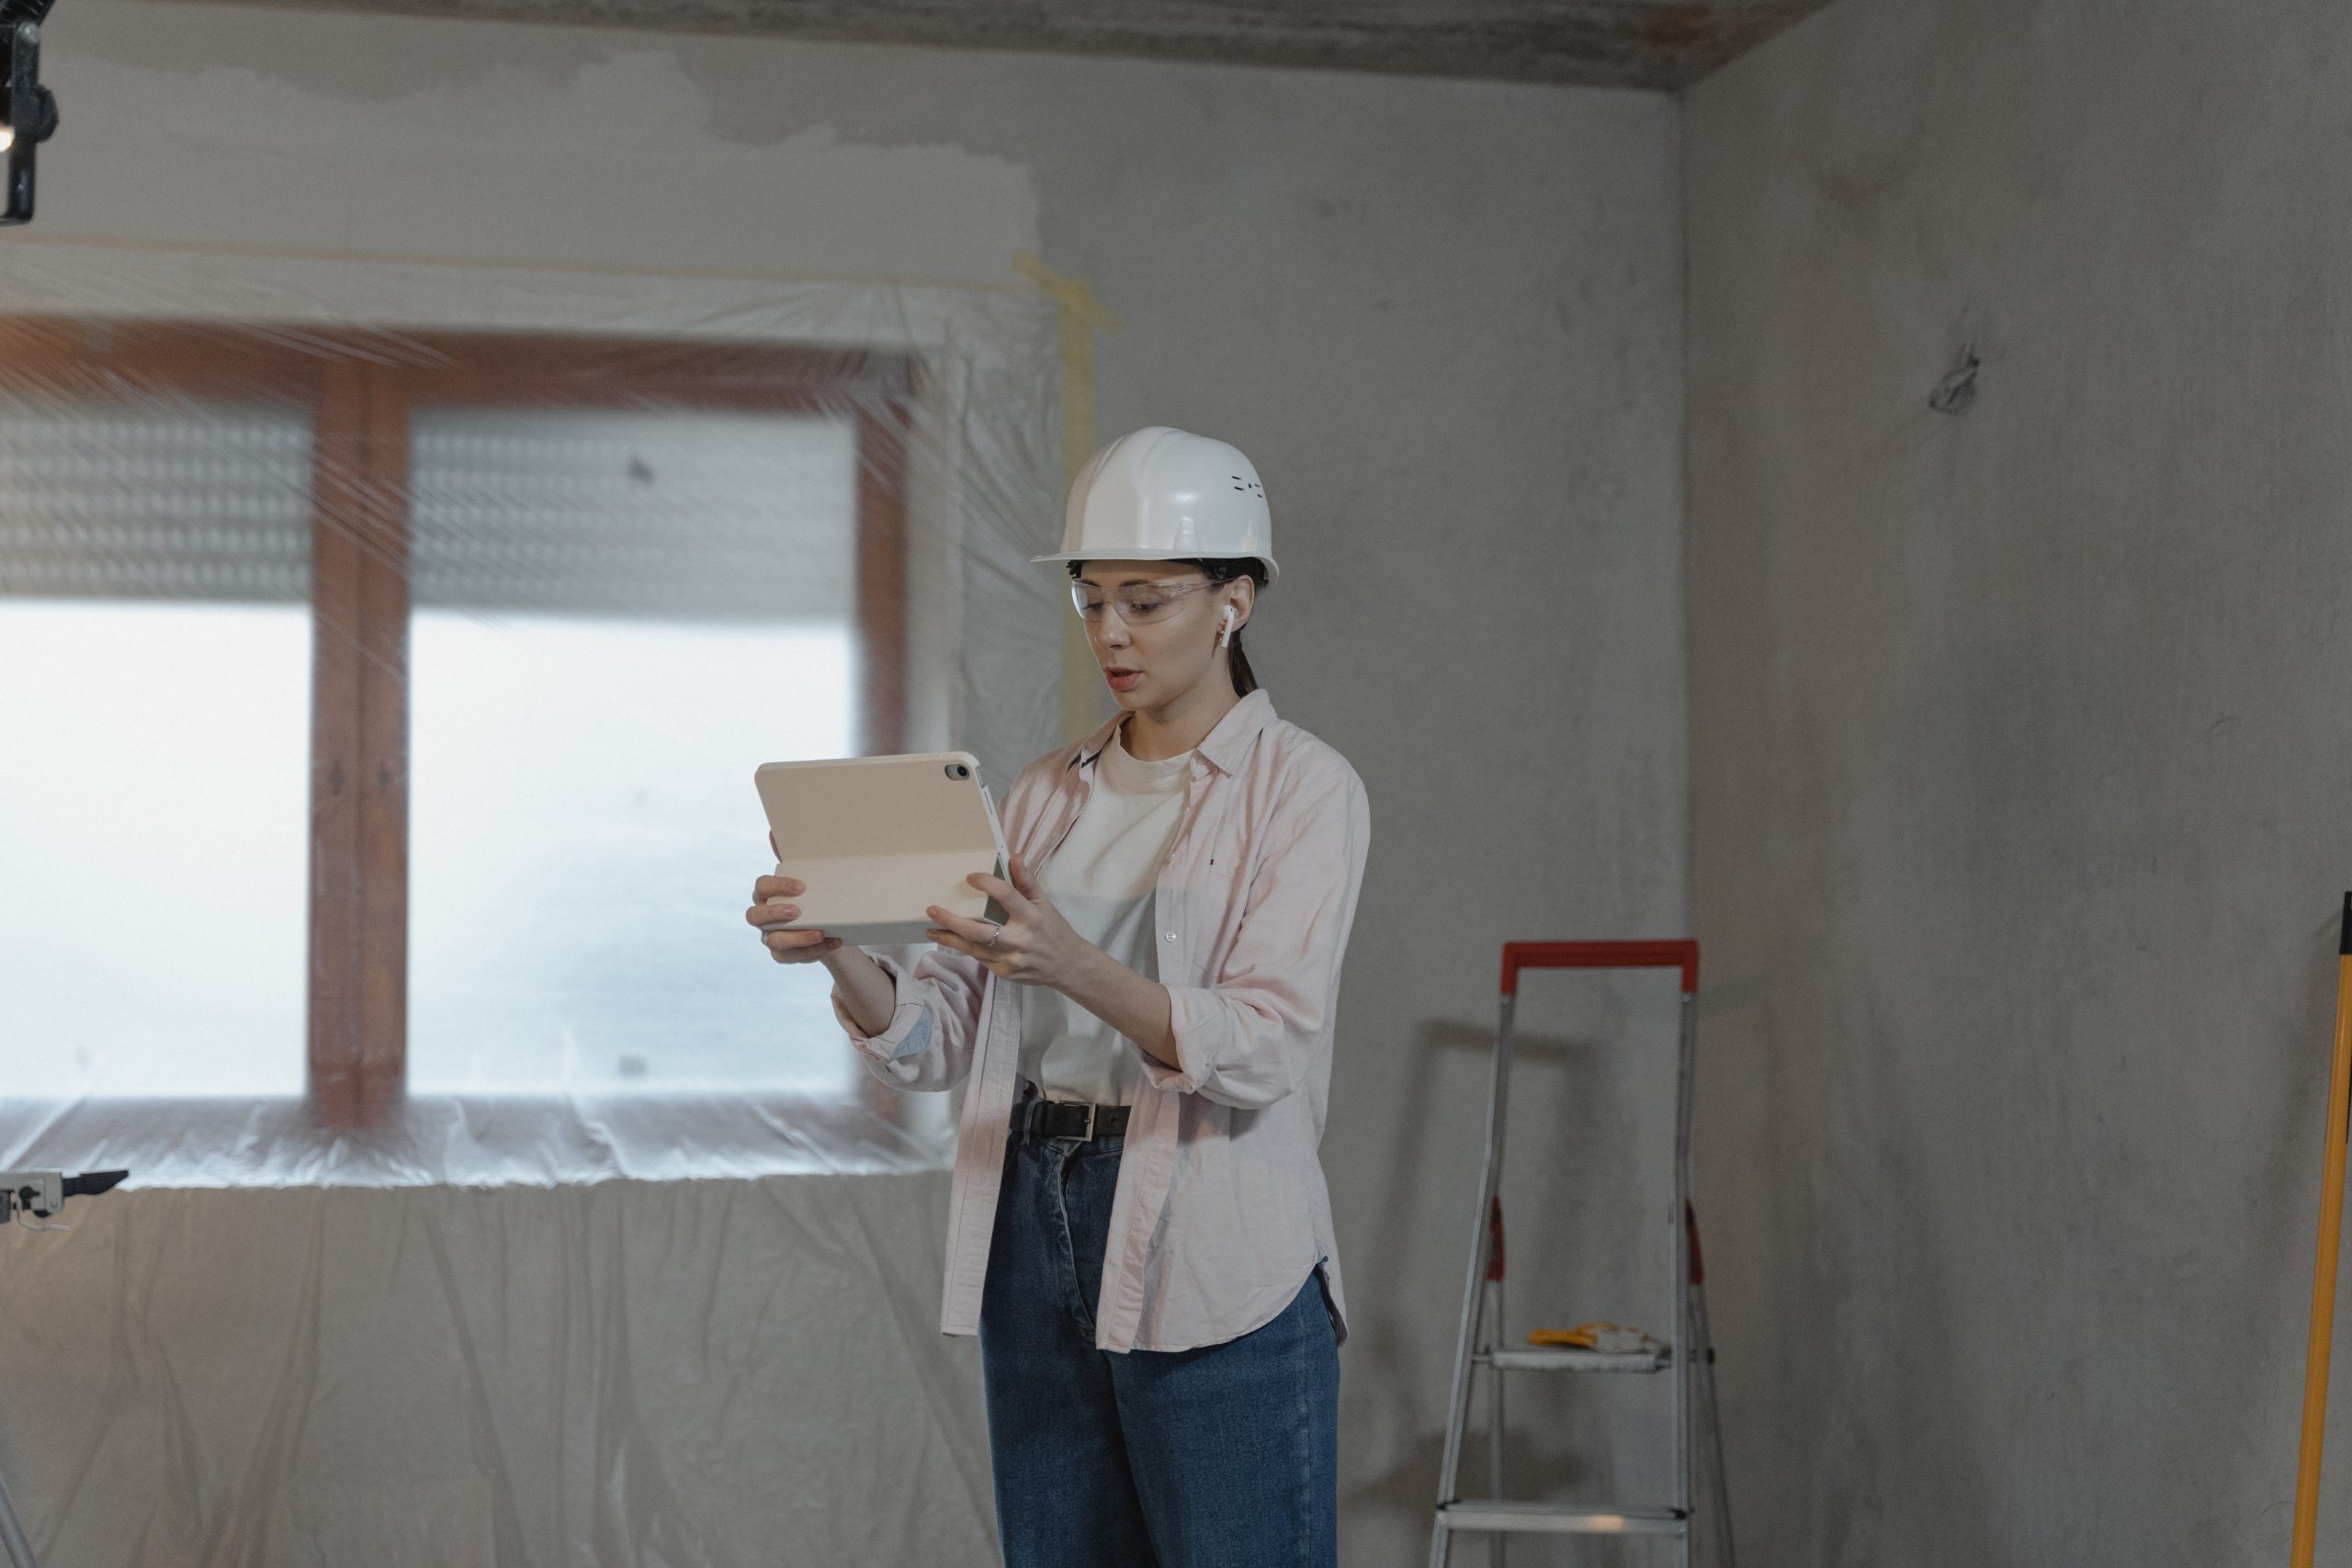 Which Professional Should You Hire First to Build Your House? Architect or Engineer?